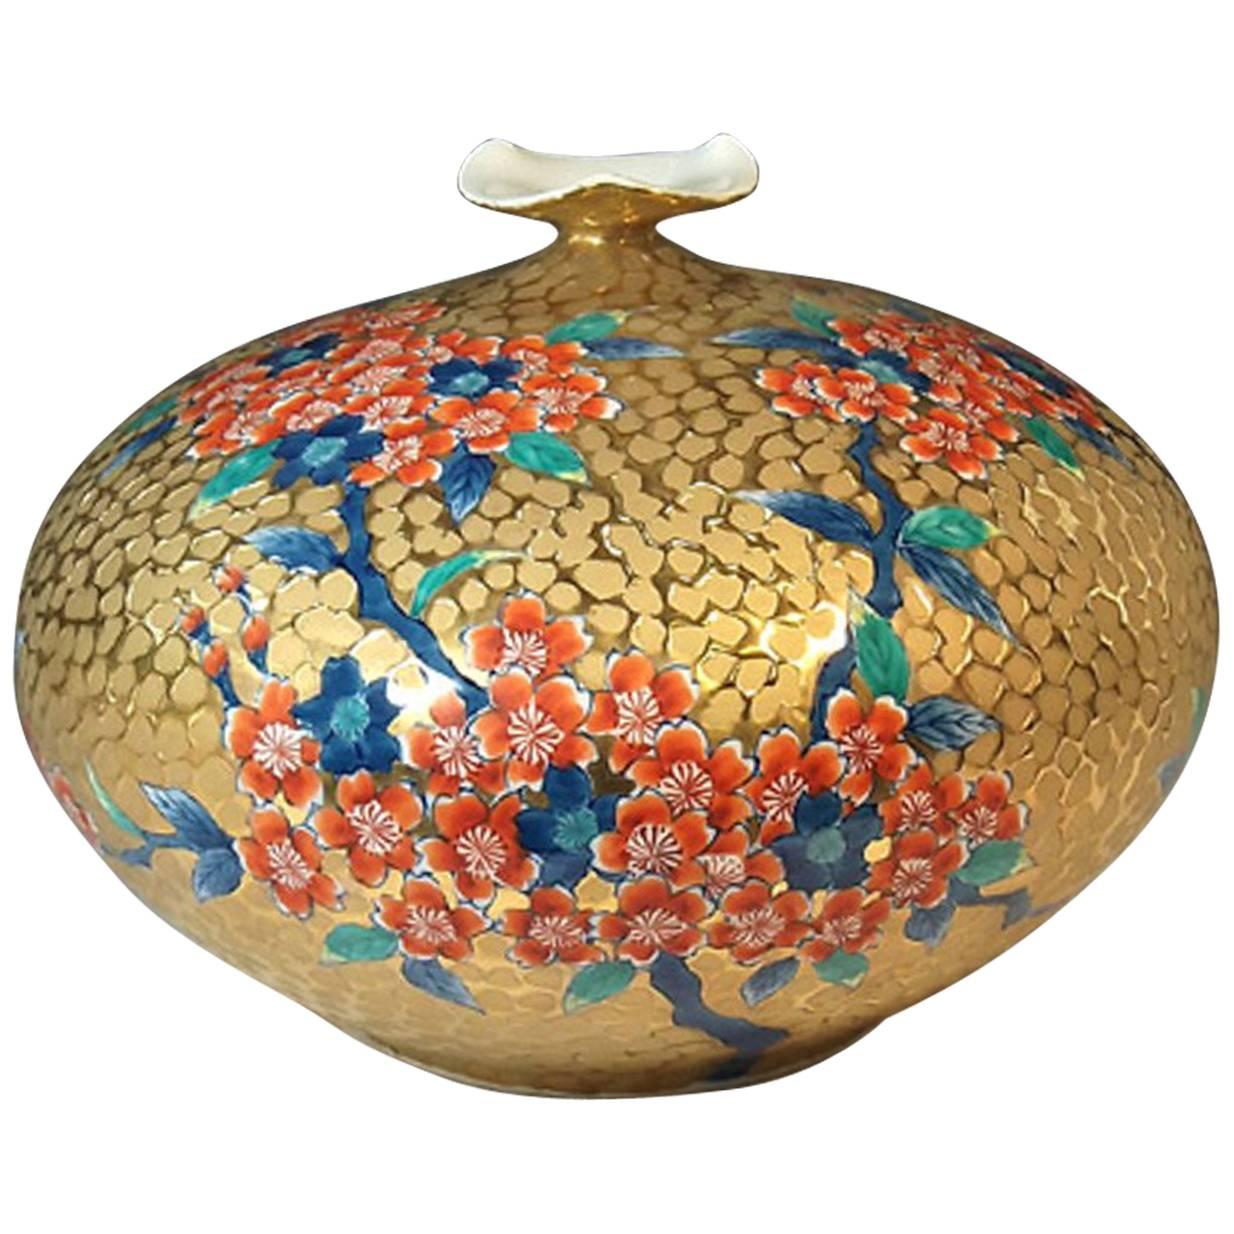 Exquisite japanese contemporary gilded and dimpled porcelain vase, decorated with cherry blossoms in iron red on a beautifully shaped body in gold, a signed work by widely respected award-winning master porcelain artist in Imari-Arita style. This